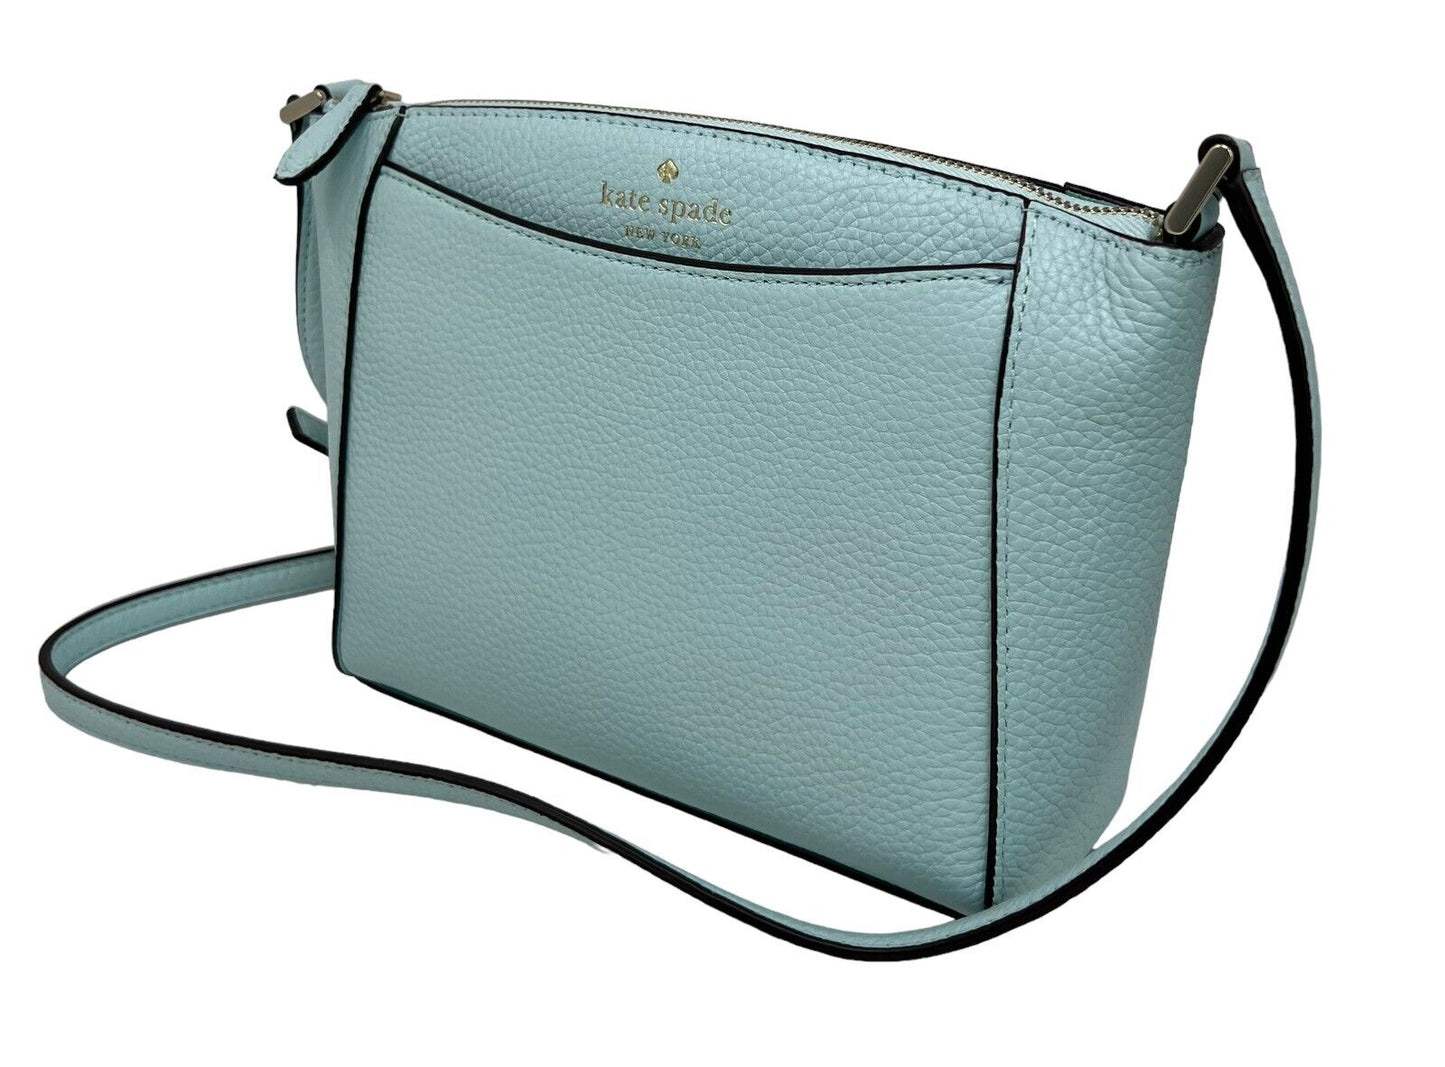 Kate Spade Monica Pebbled Leather Top Zip Small Crossbody Bag WKR00258 $279